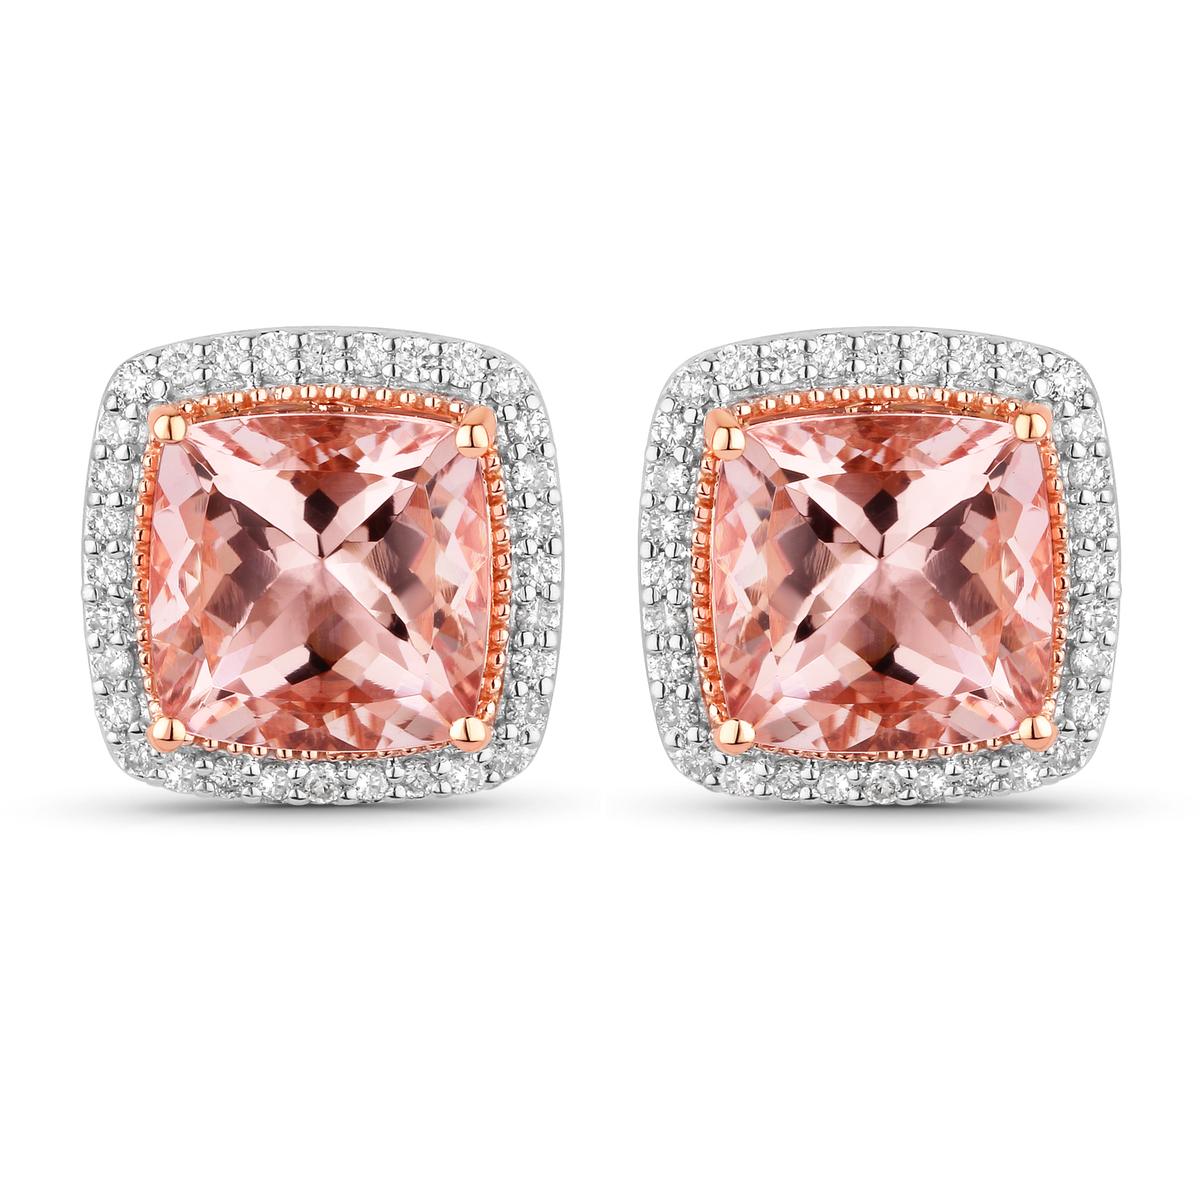 14KT Rose Gold 4.41cts Morganite and Diamond Earrings